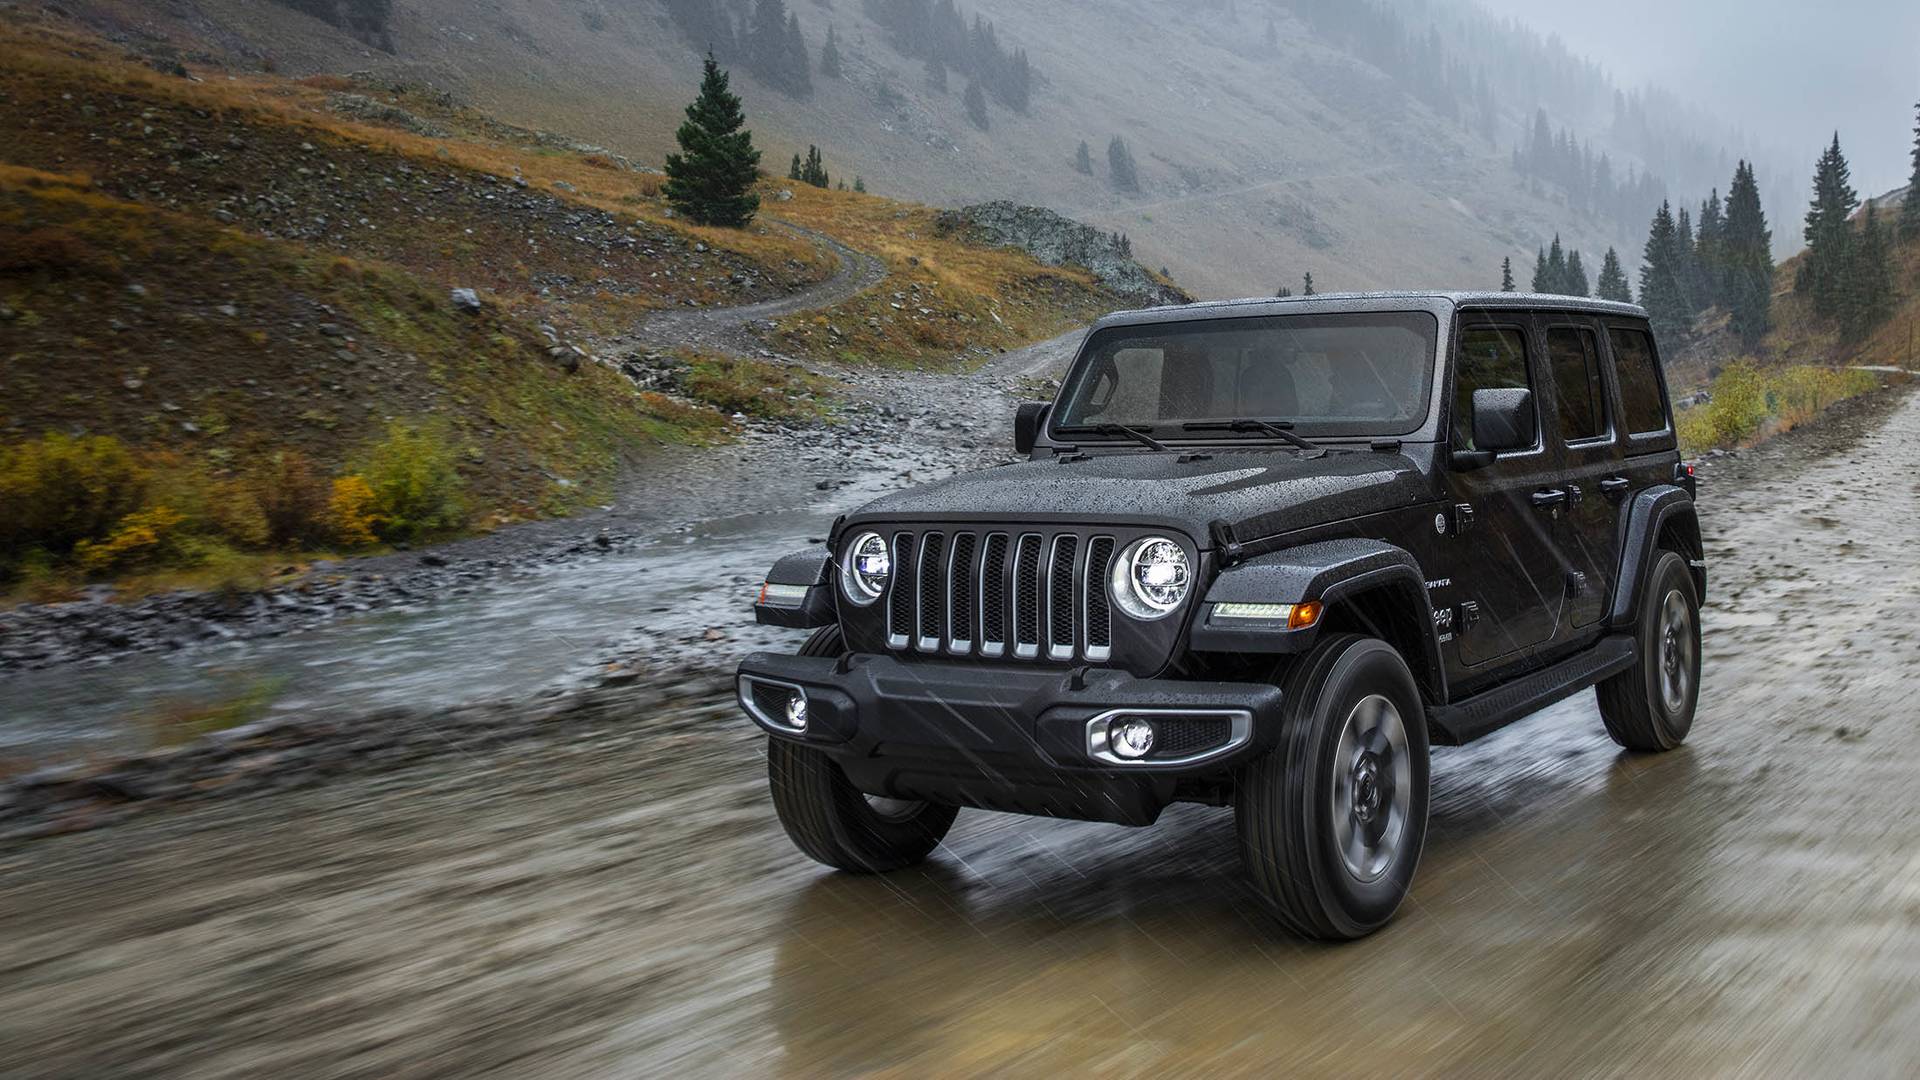 2018 Jeep Wrangler First Drive Review Pictures, Specs Digital Trends ...